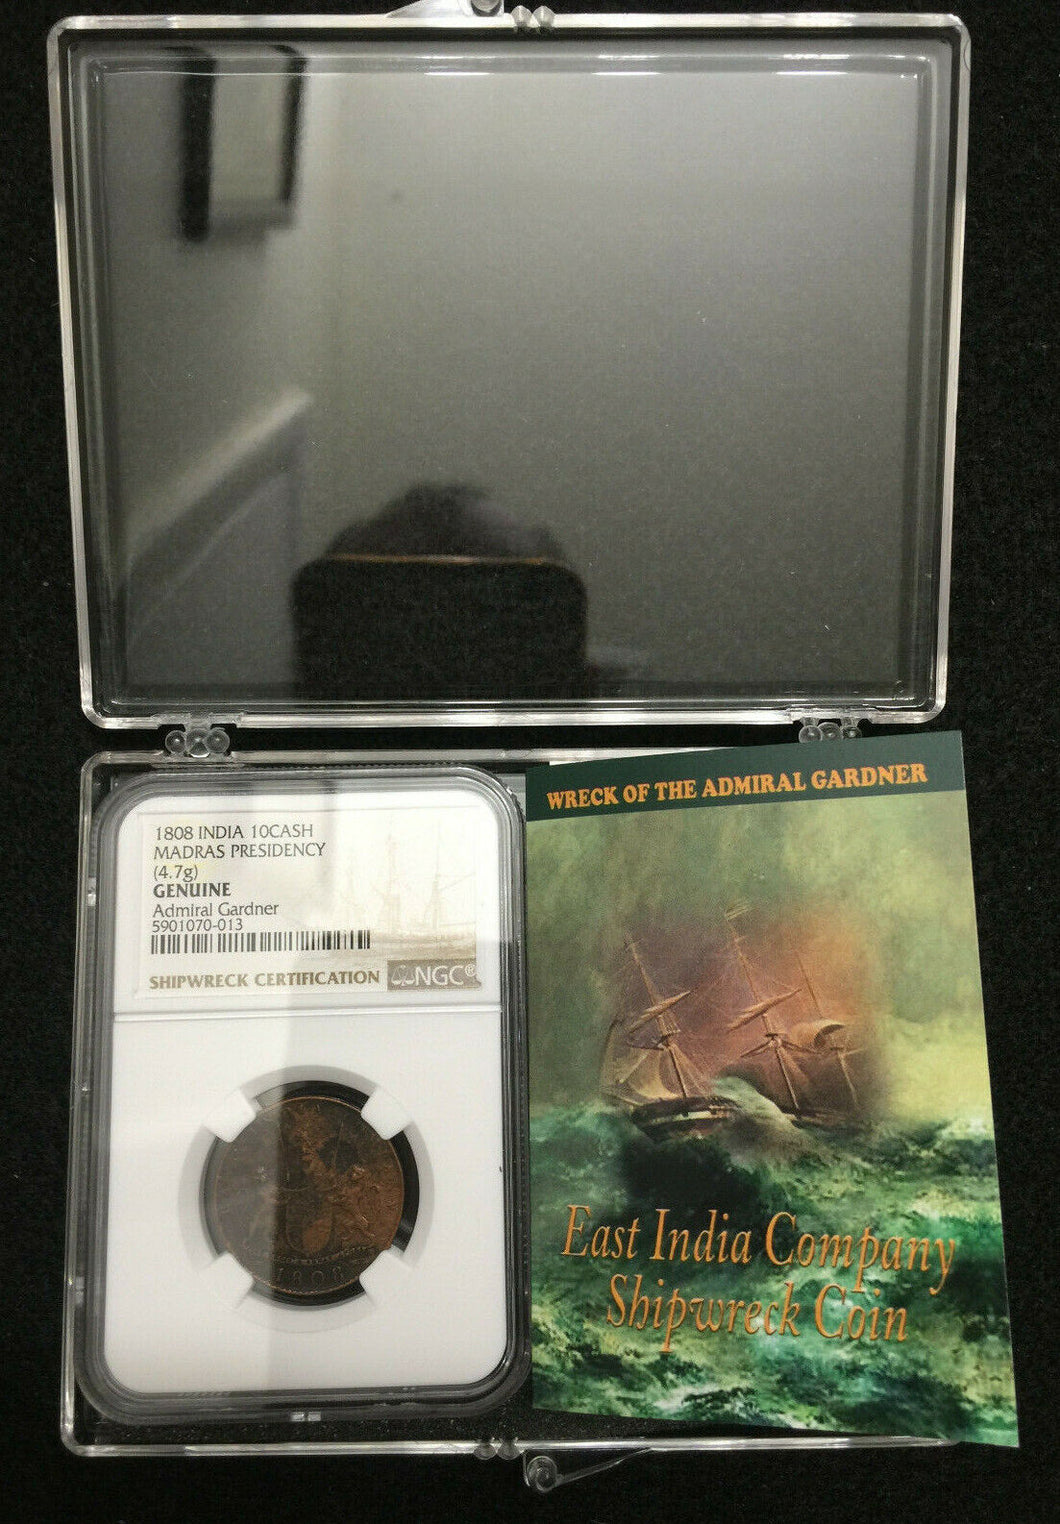 1808 Gardner Shipwreck East India Co.10 CASH Coin NGC Certified Case & History